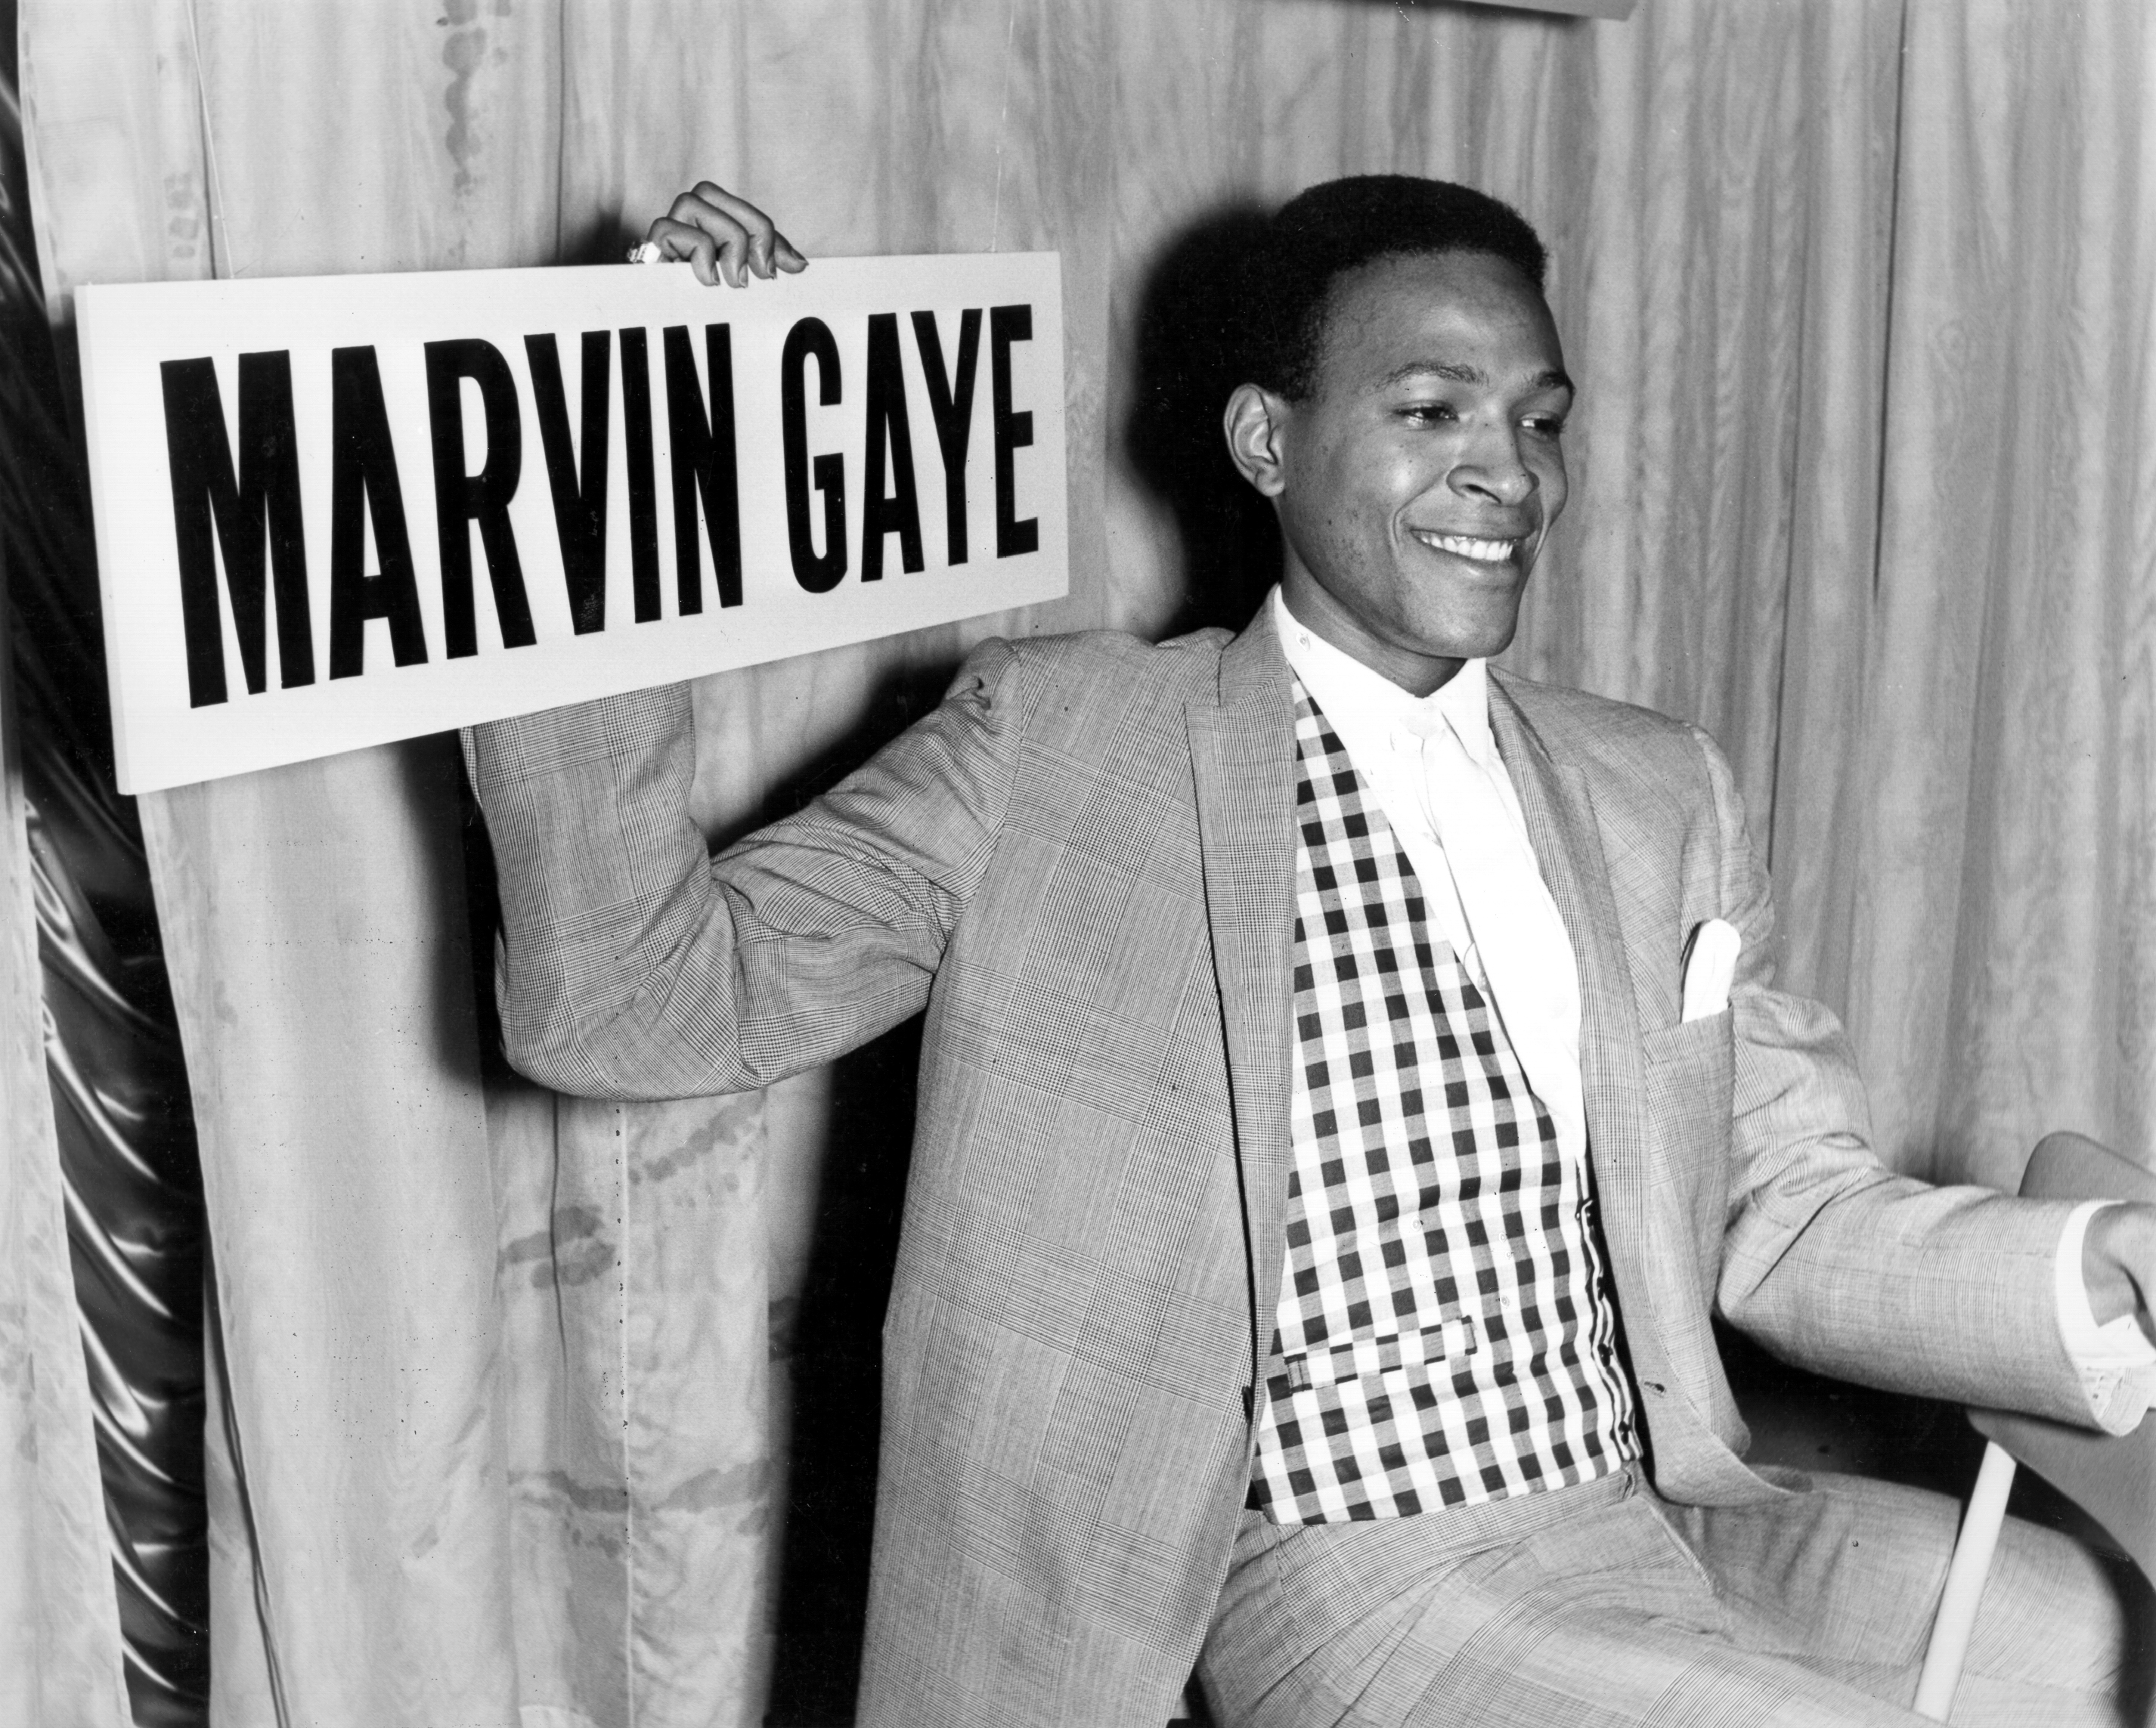 Marvin Gaye holds court at a press conference at Heathrow Airport circa 1964 as he arrives in London, England. | Source: Getty Images